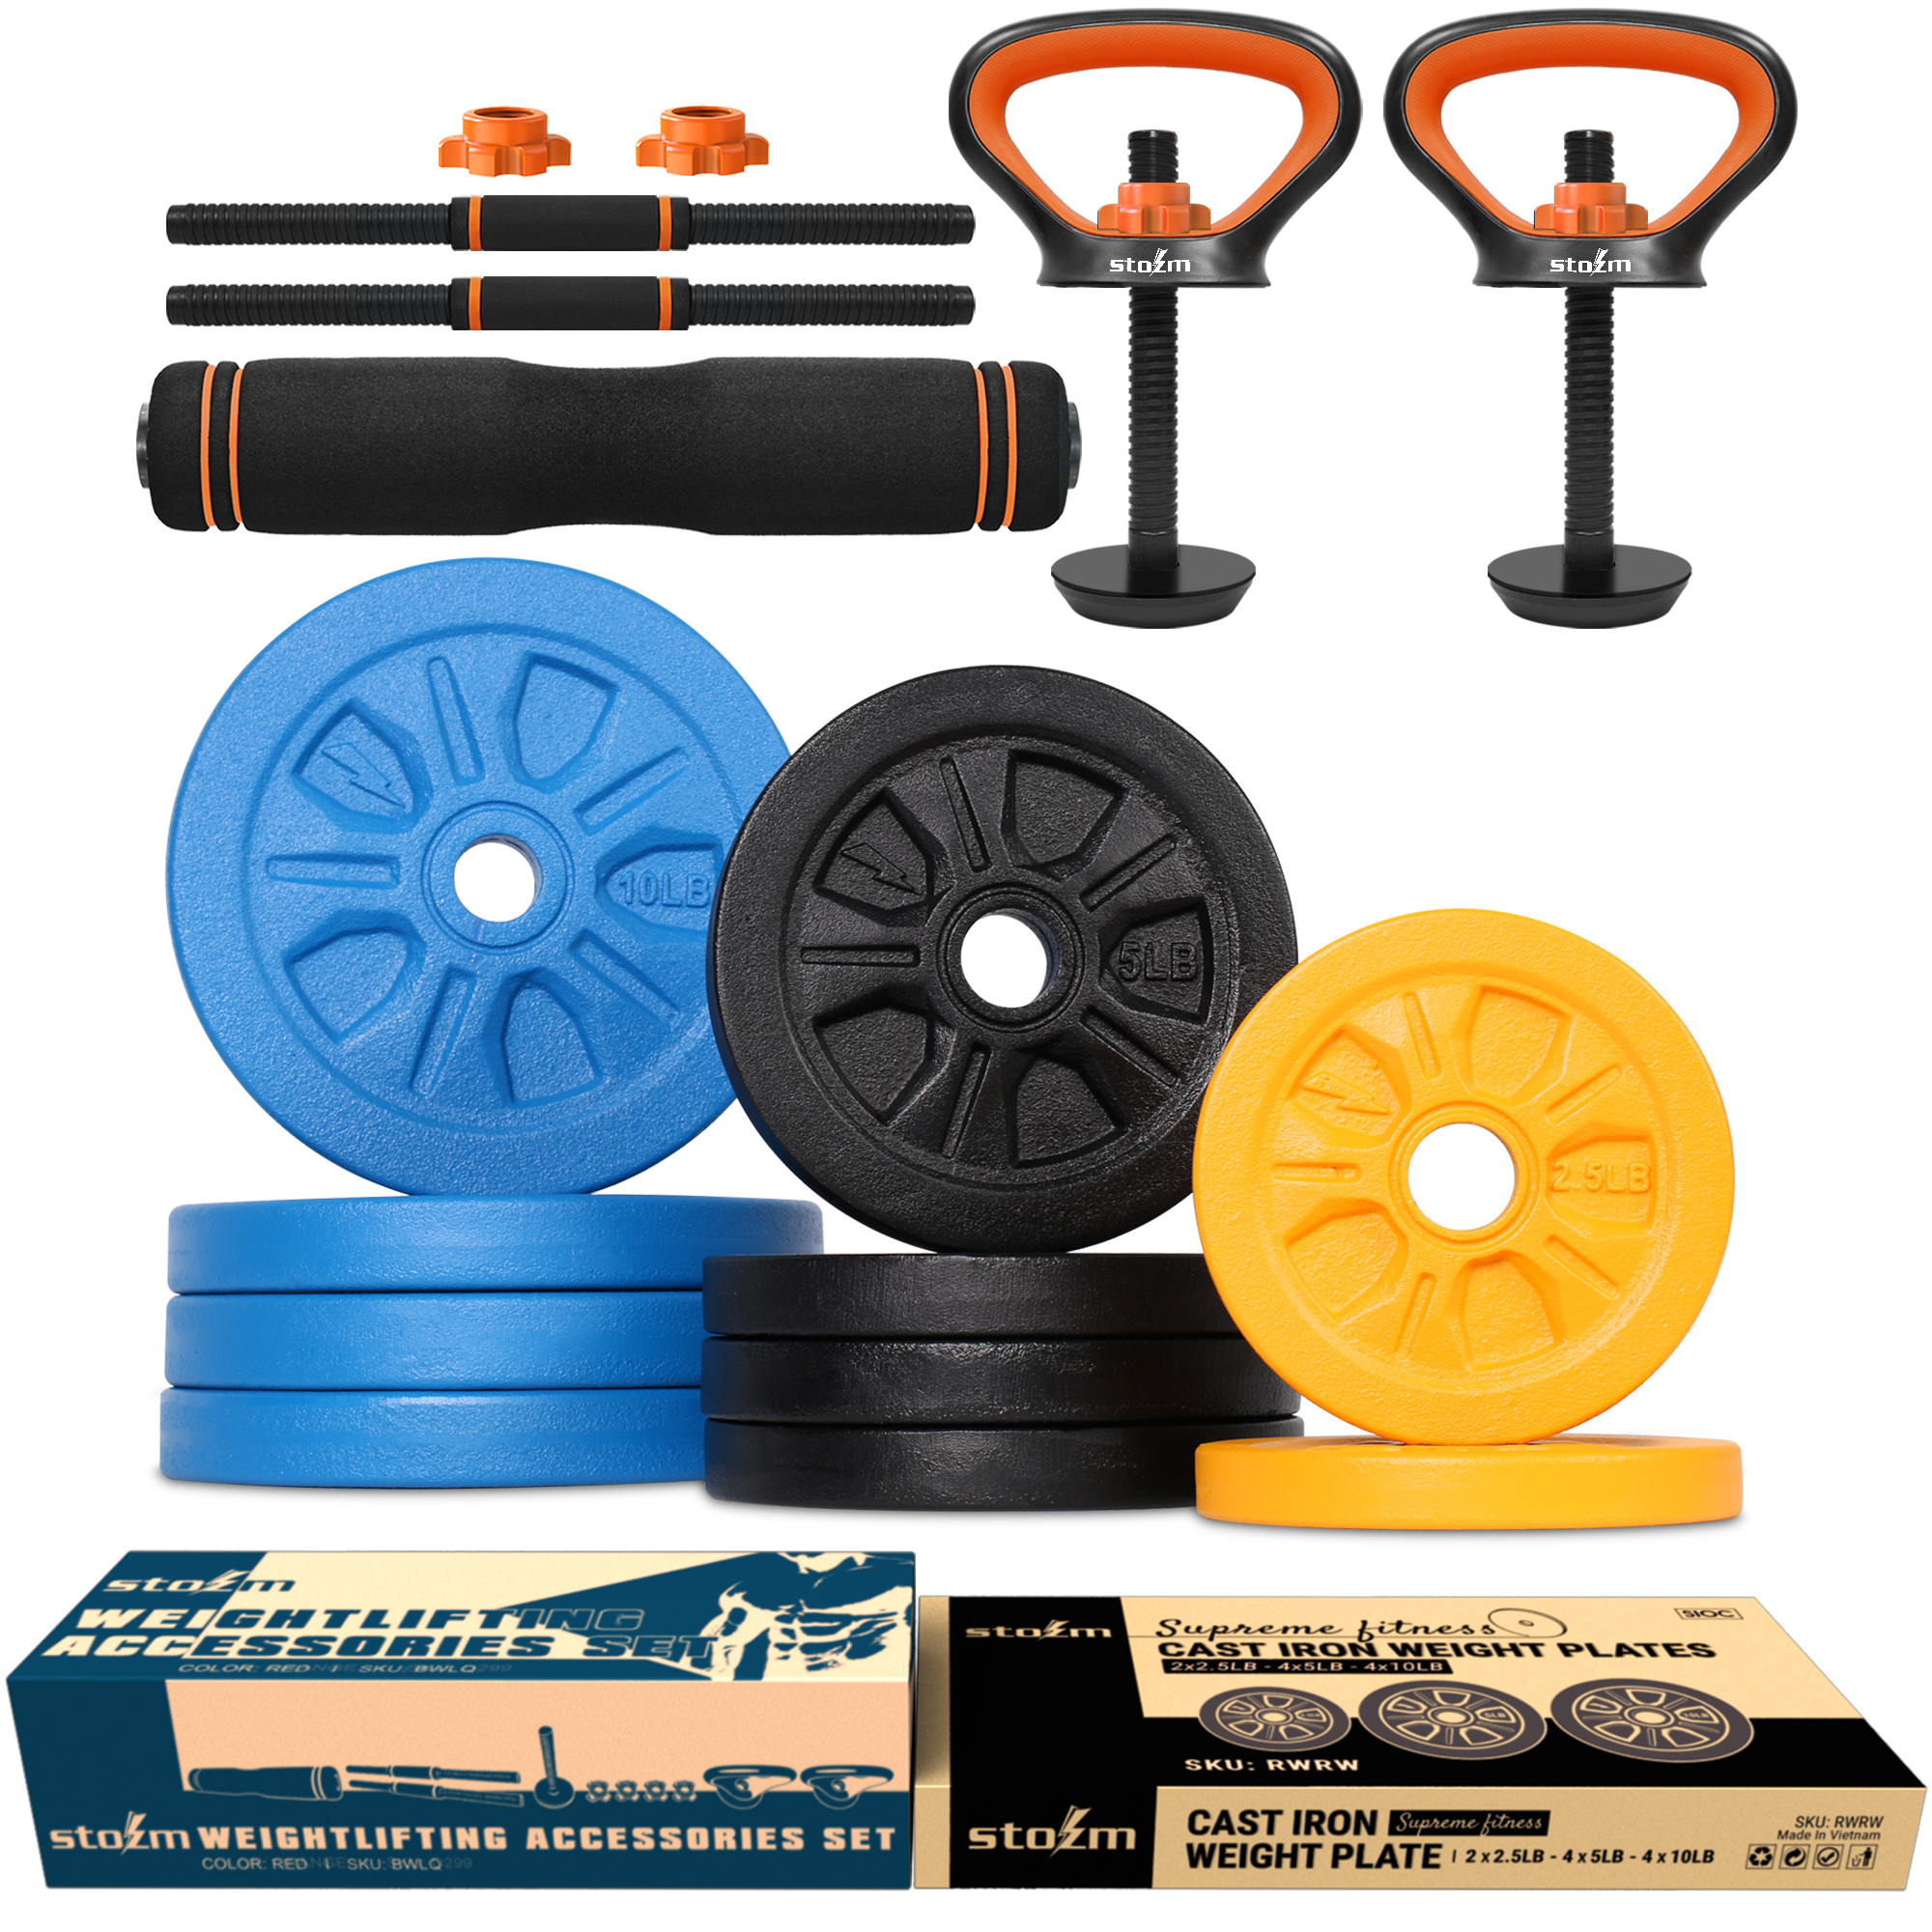  SWOLLHOUSE Weight Lifting Accessories for Men: All-in